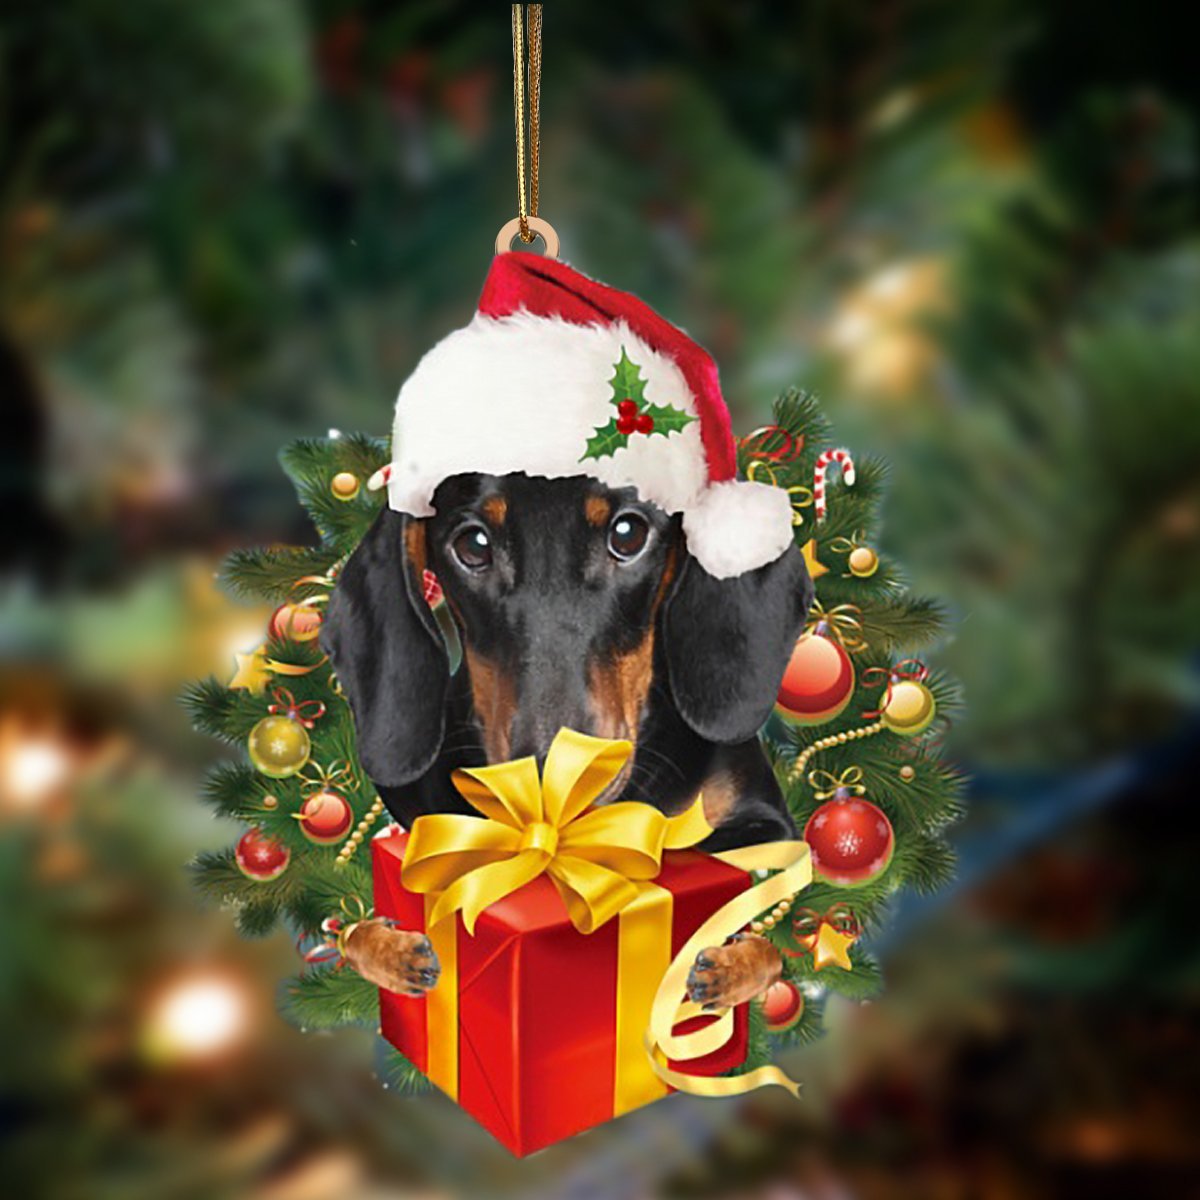 Dachshund 2 Give Gifts Hanging Ornament - Flat Acrylic Dog Ornament – Dog Lovers Gifts For Him Or Her